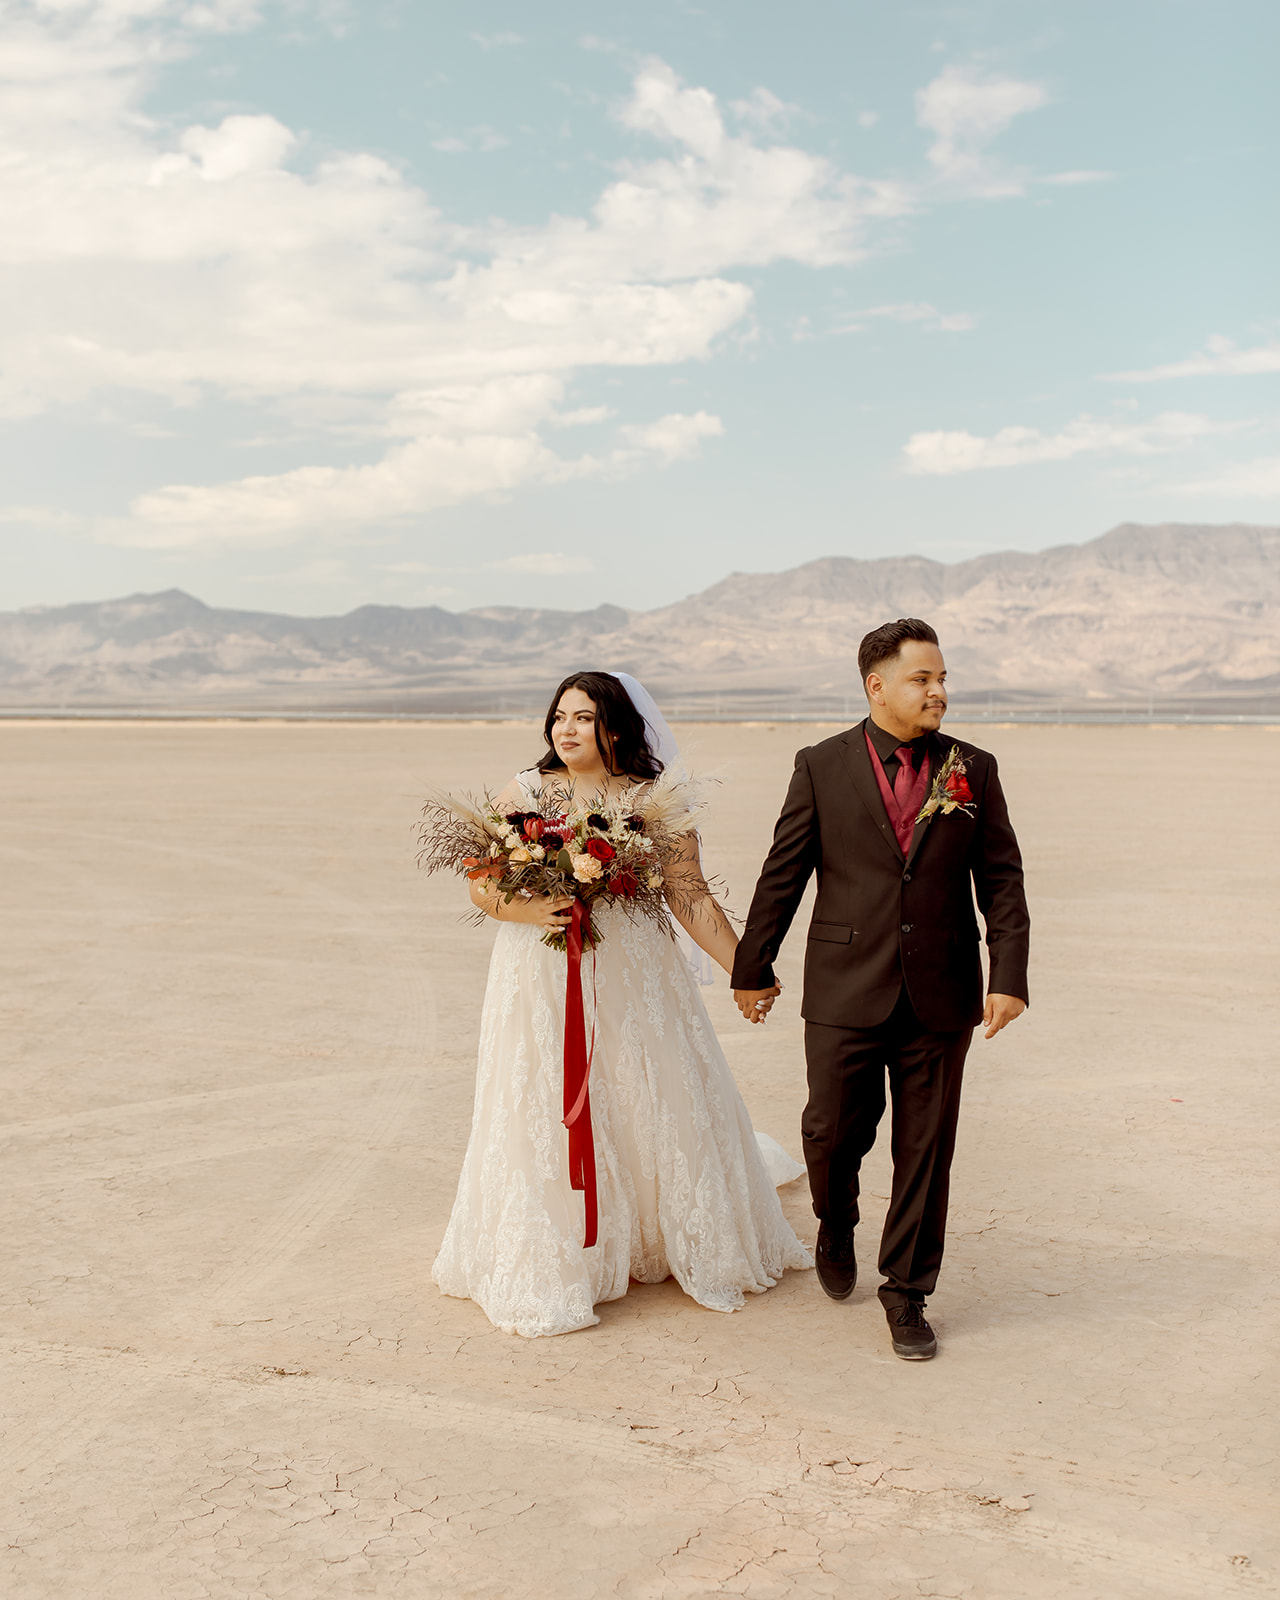 Newlyweds Walking on Dry Lake Bed after Eloping in Moody Dry Lake Bed Elopement 